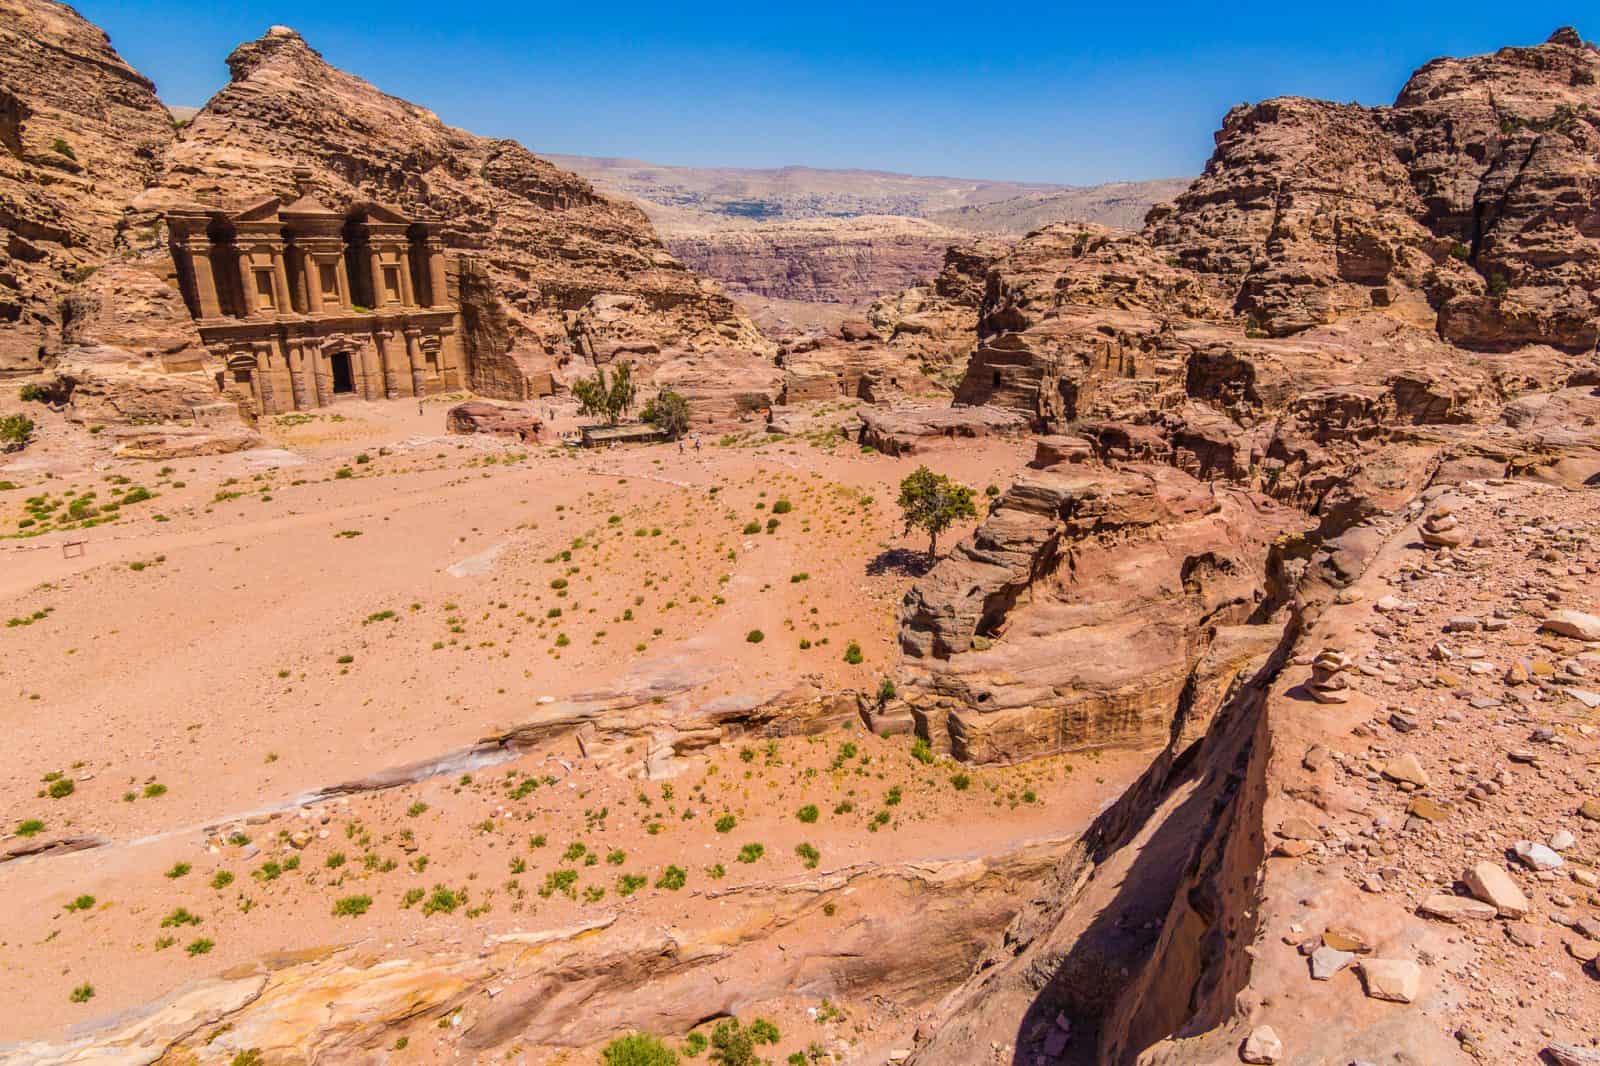 View of the Monastery from above, City of Petra, Jordan